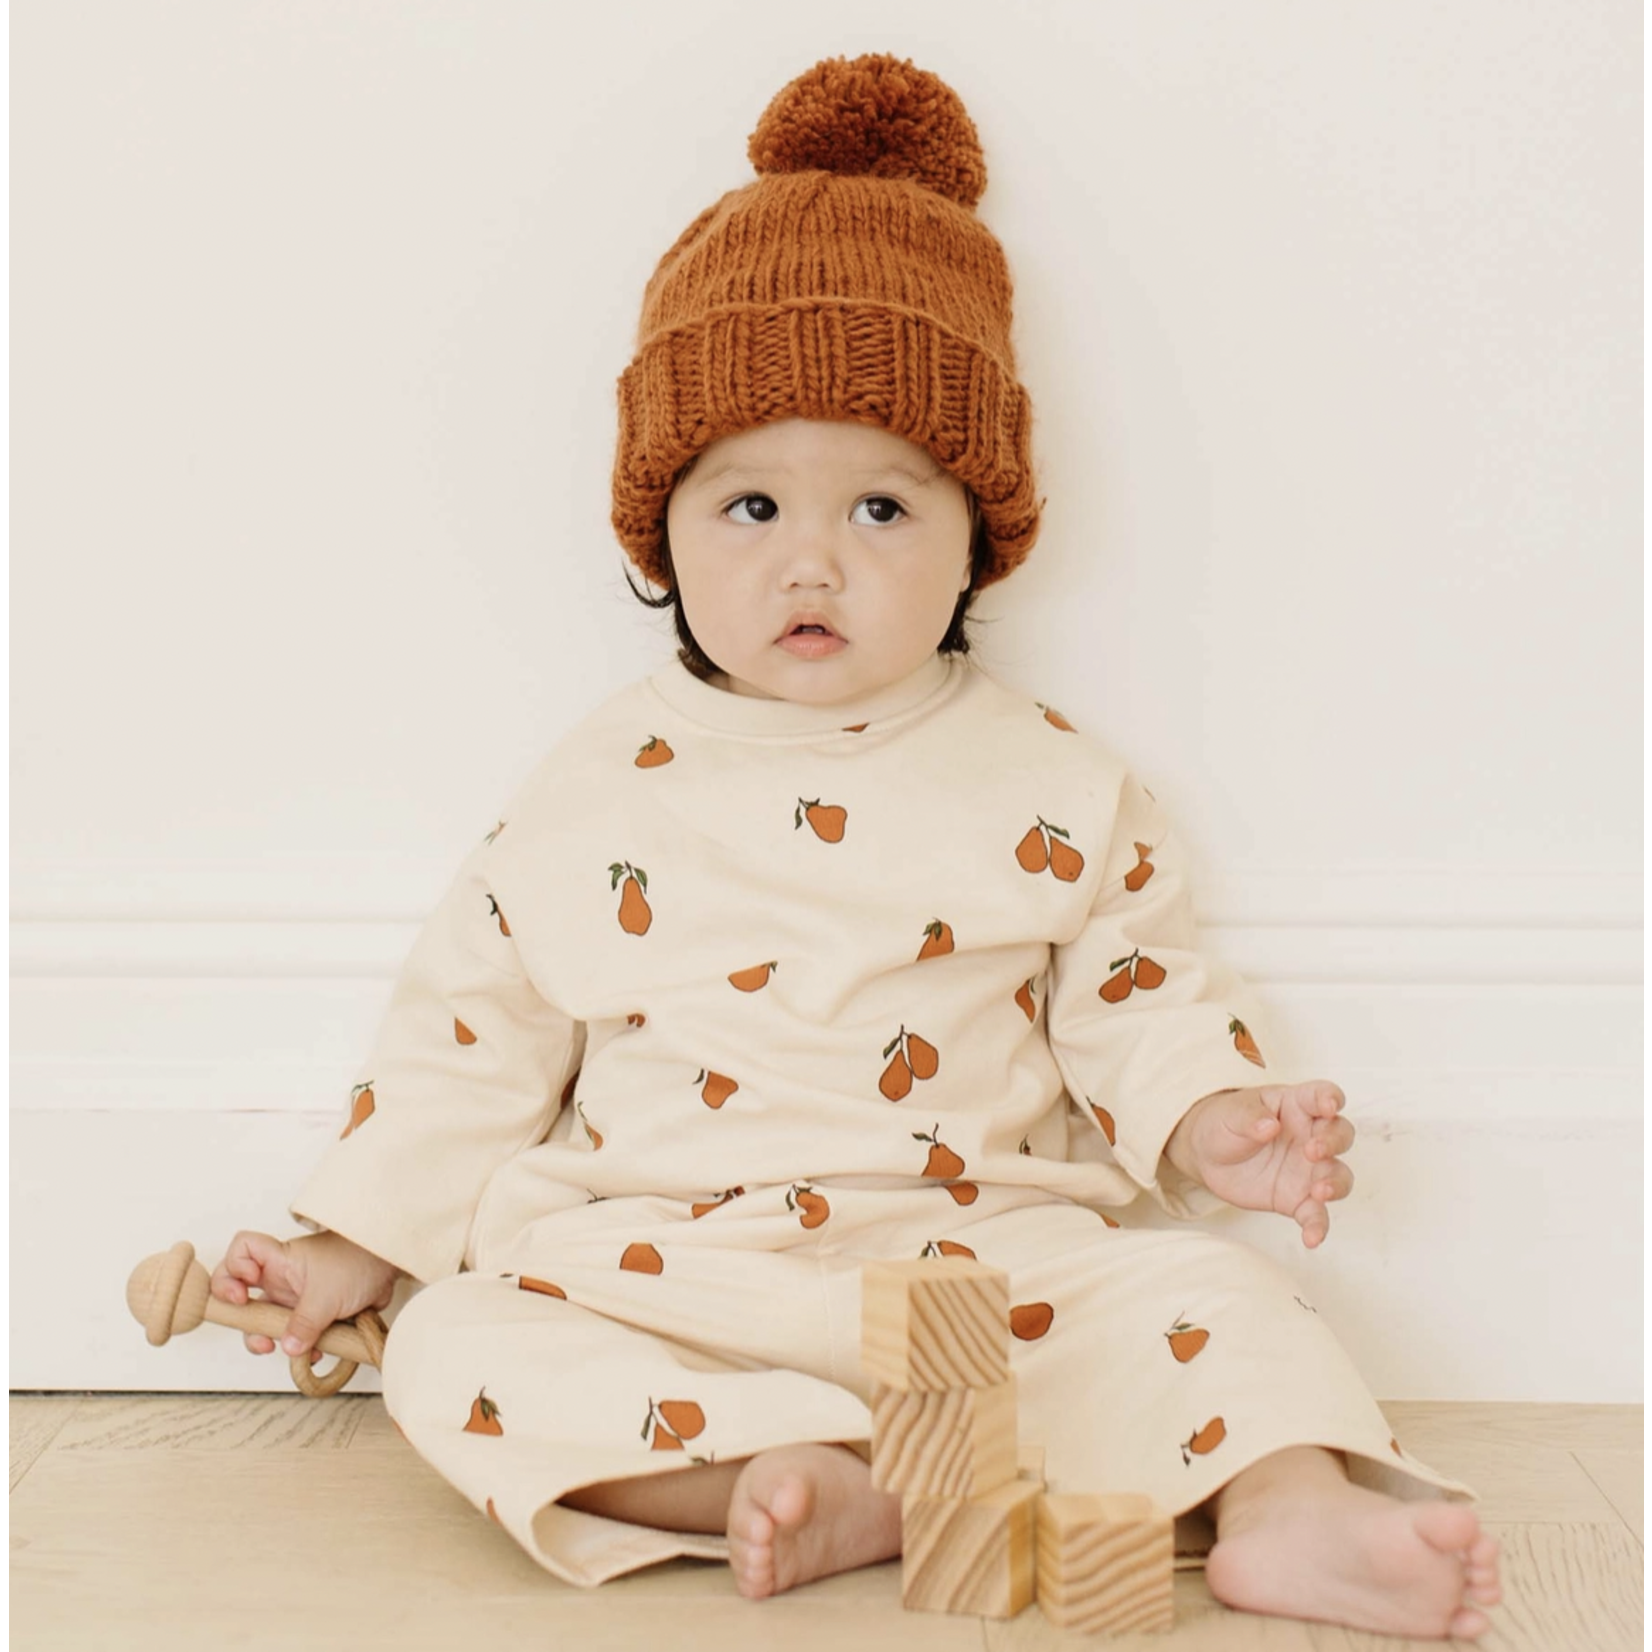 The Blueberry Hill Classic Baby Pom Hat-Cinnamon - FINAL SALE